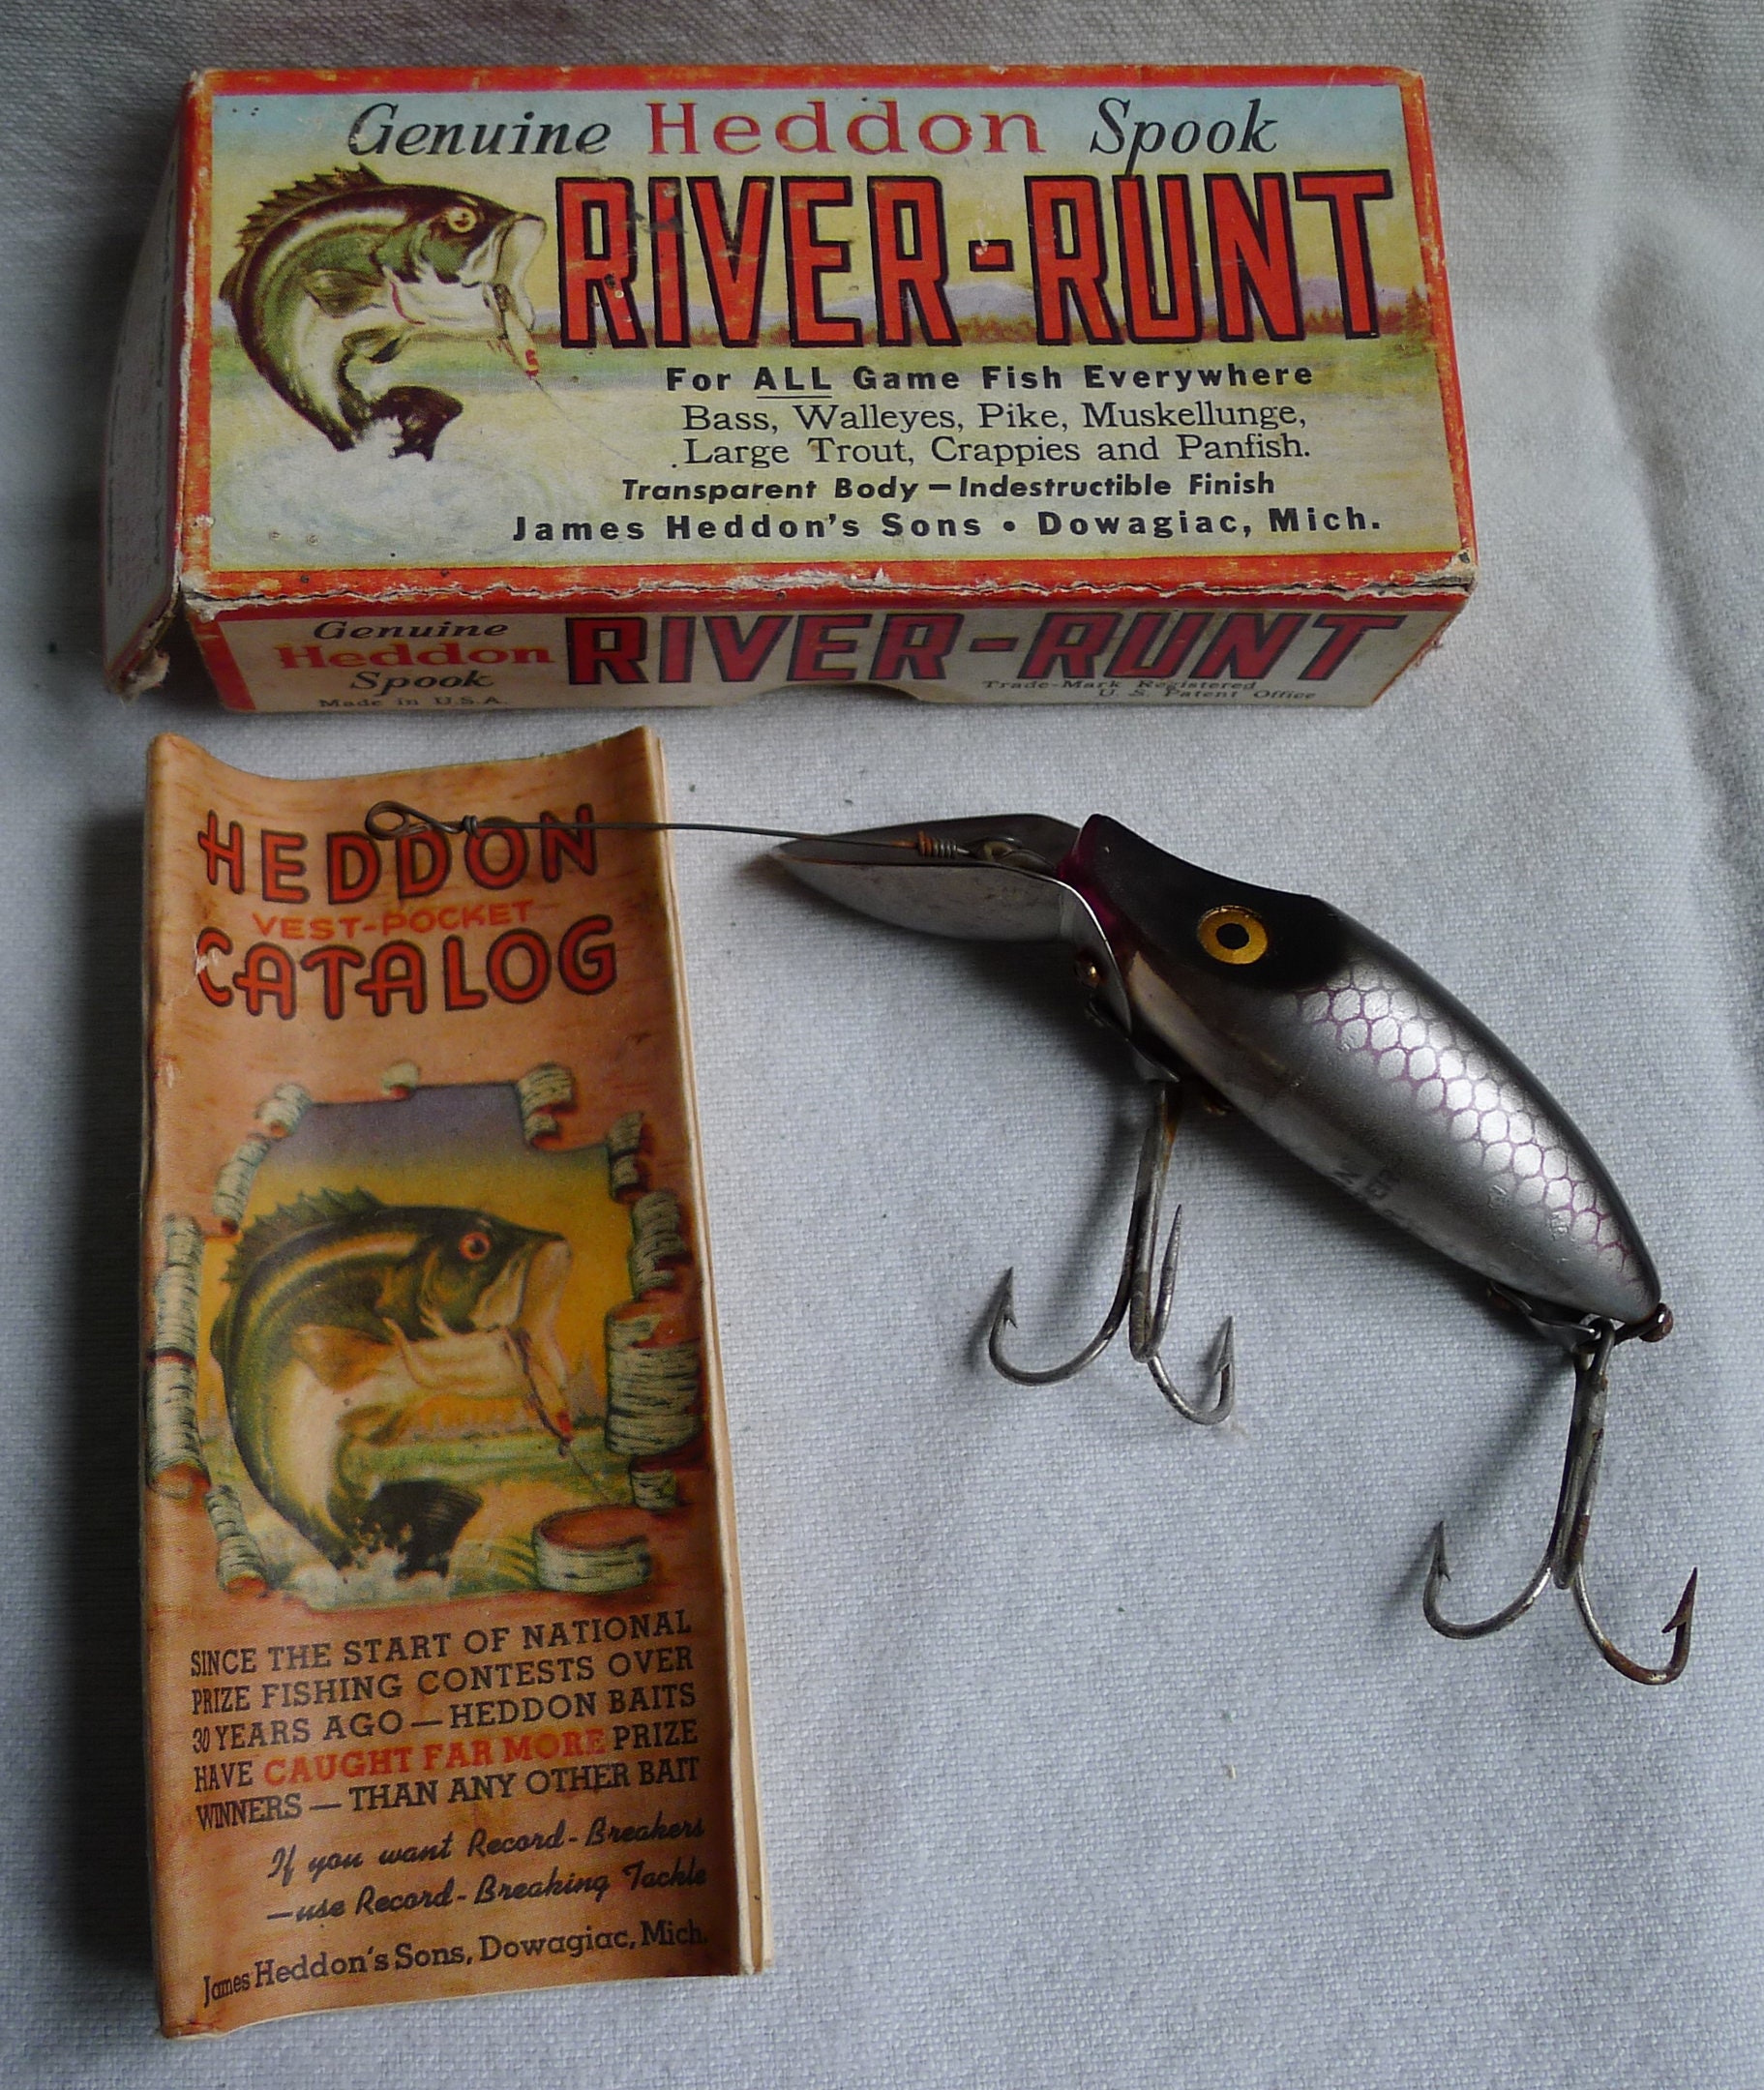 Old Fishing Lures & Tackle by Carl F. Luckey